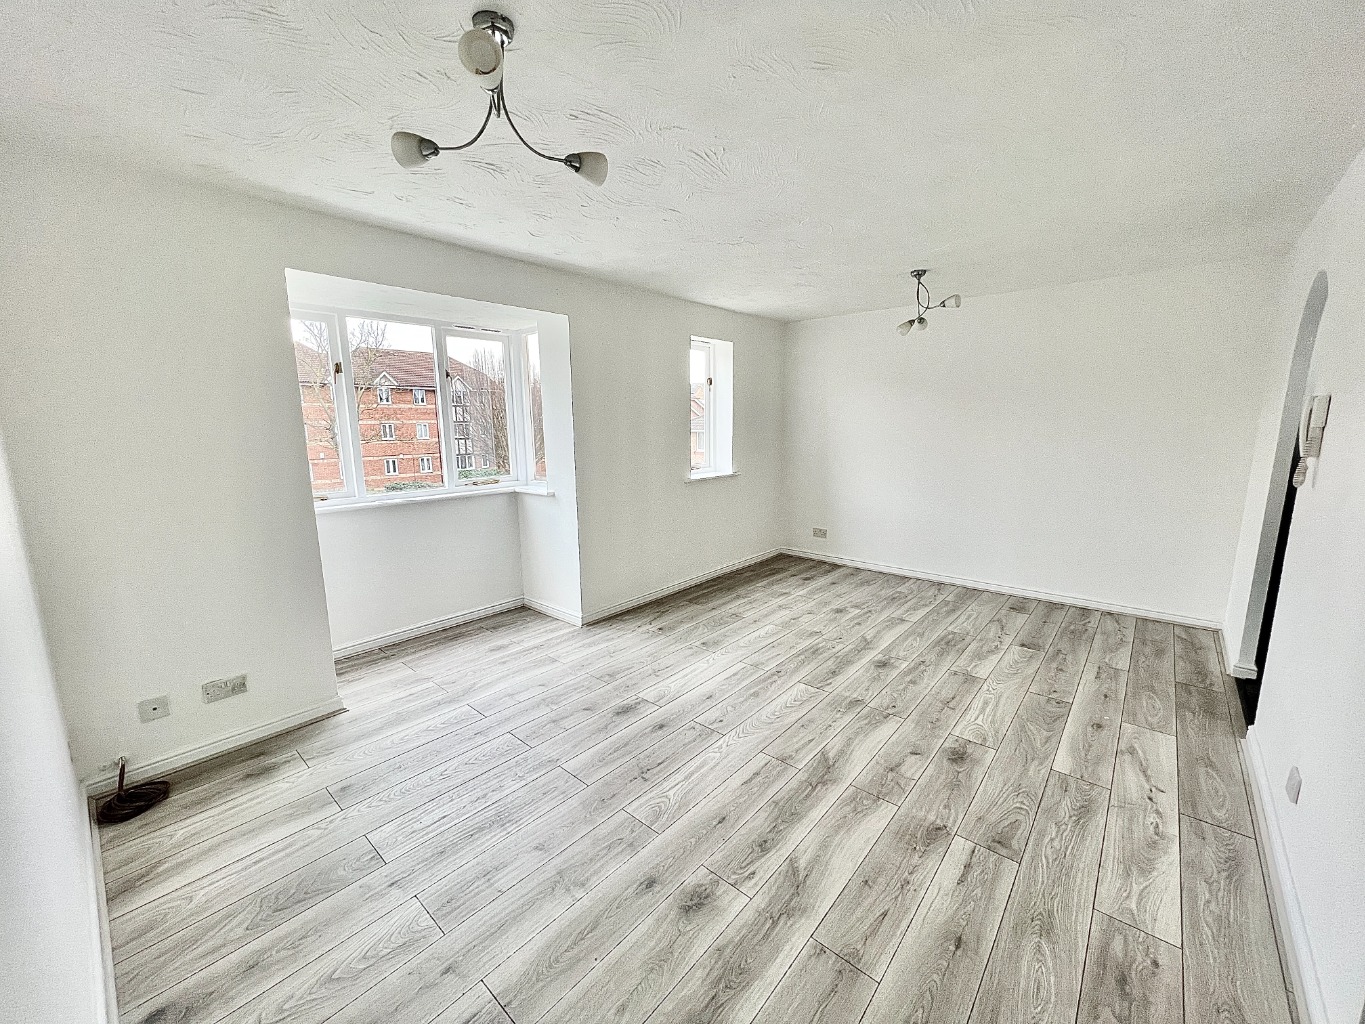 Beaumont Gibbs are delighted to offer this beautifully presented two bedroomed first floor flat for sale. Situated close by to Erith town centre and local amenities, the property is available for immediate occupancy.